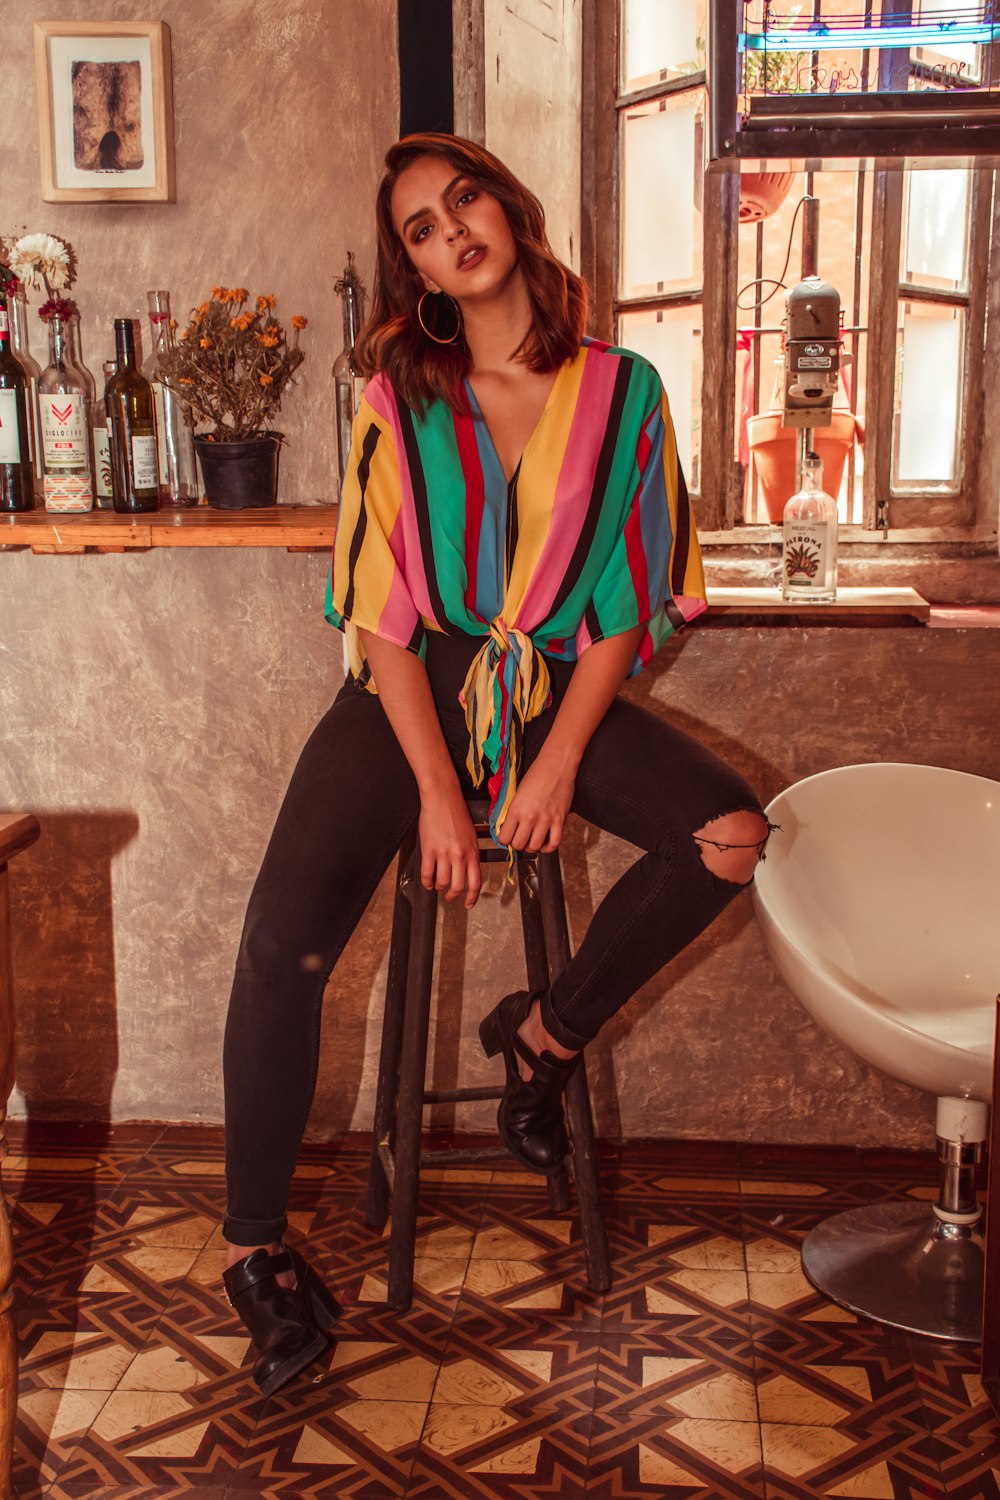 woman in yellow, pink, green, and red vertical striped top sitting on bar stool